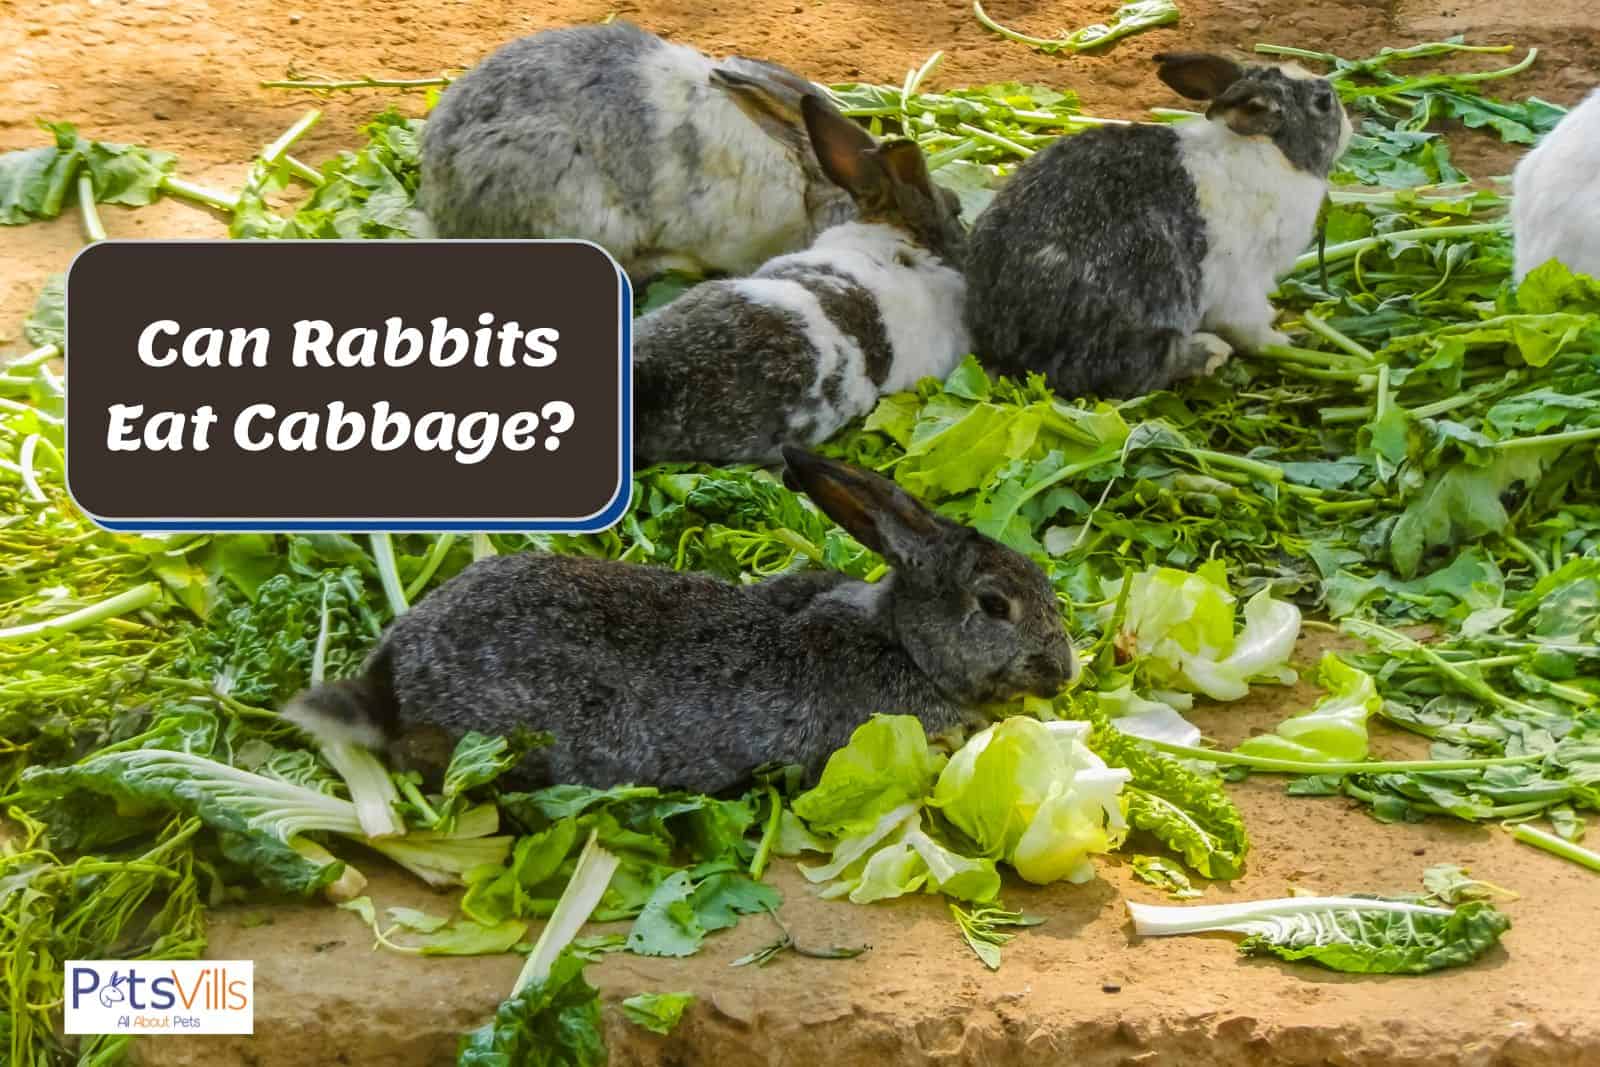 rabbits trying to eat cabbage but can rabbits eat cabbage